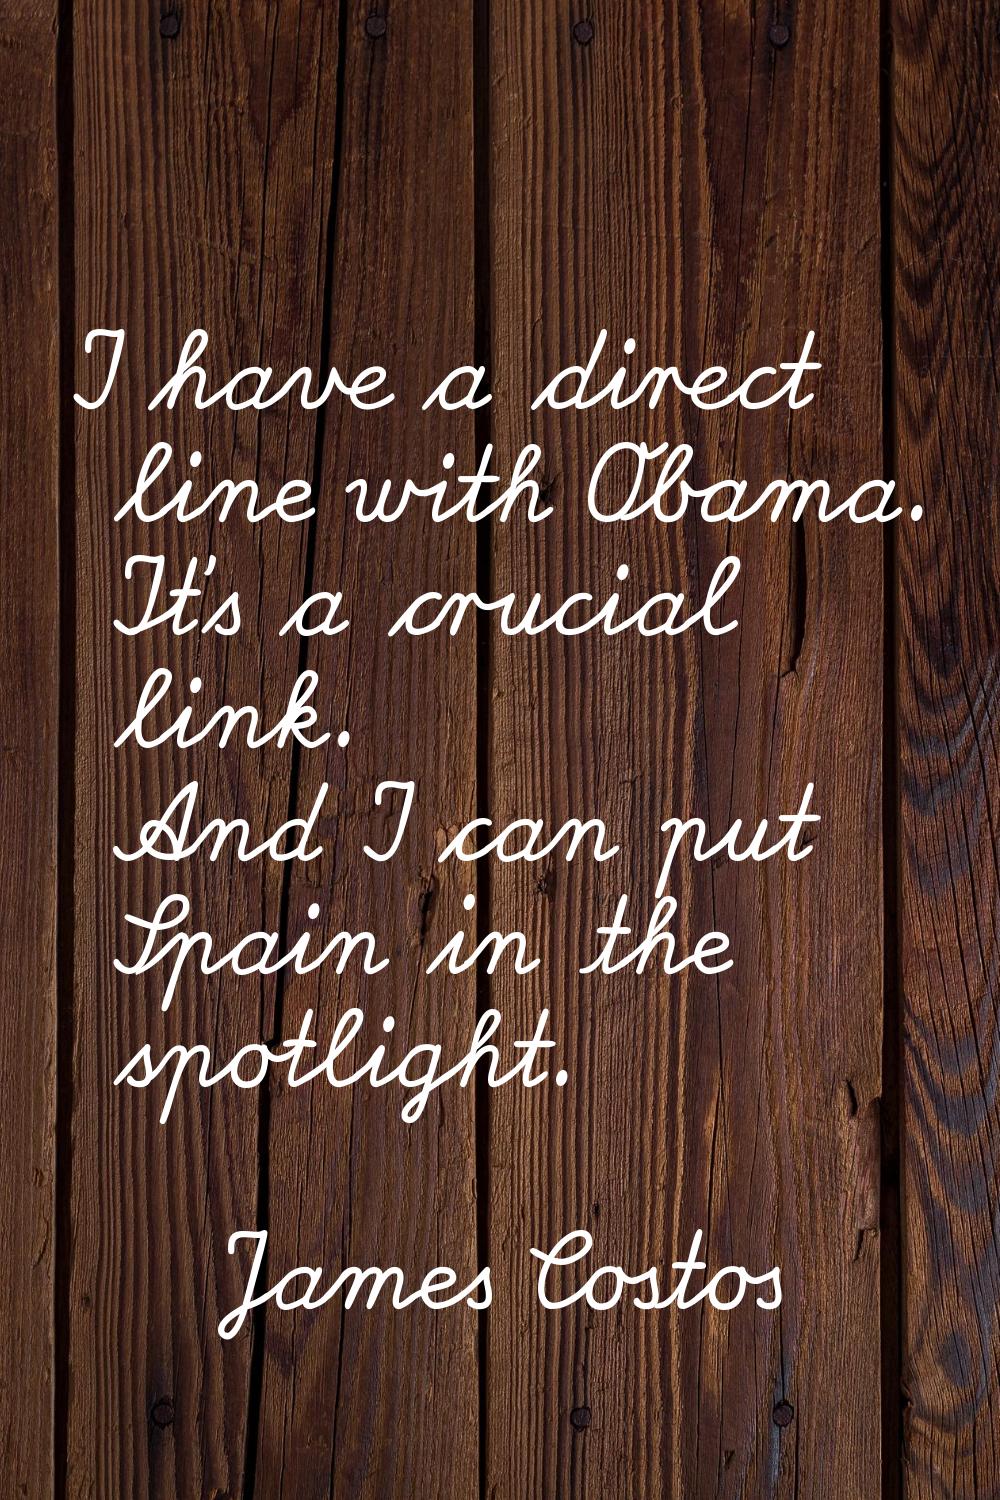 I have a direct line with Obama. It's a crucial link. And I can put Spain in the spotlight.